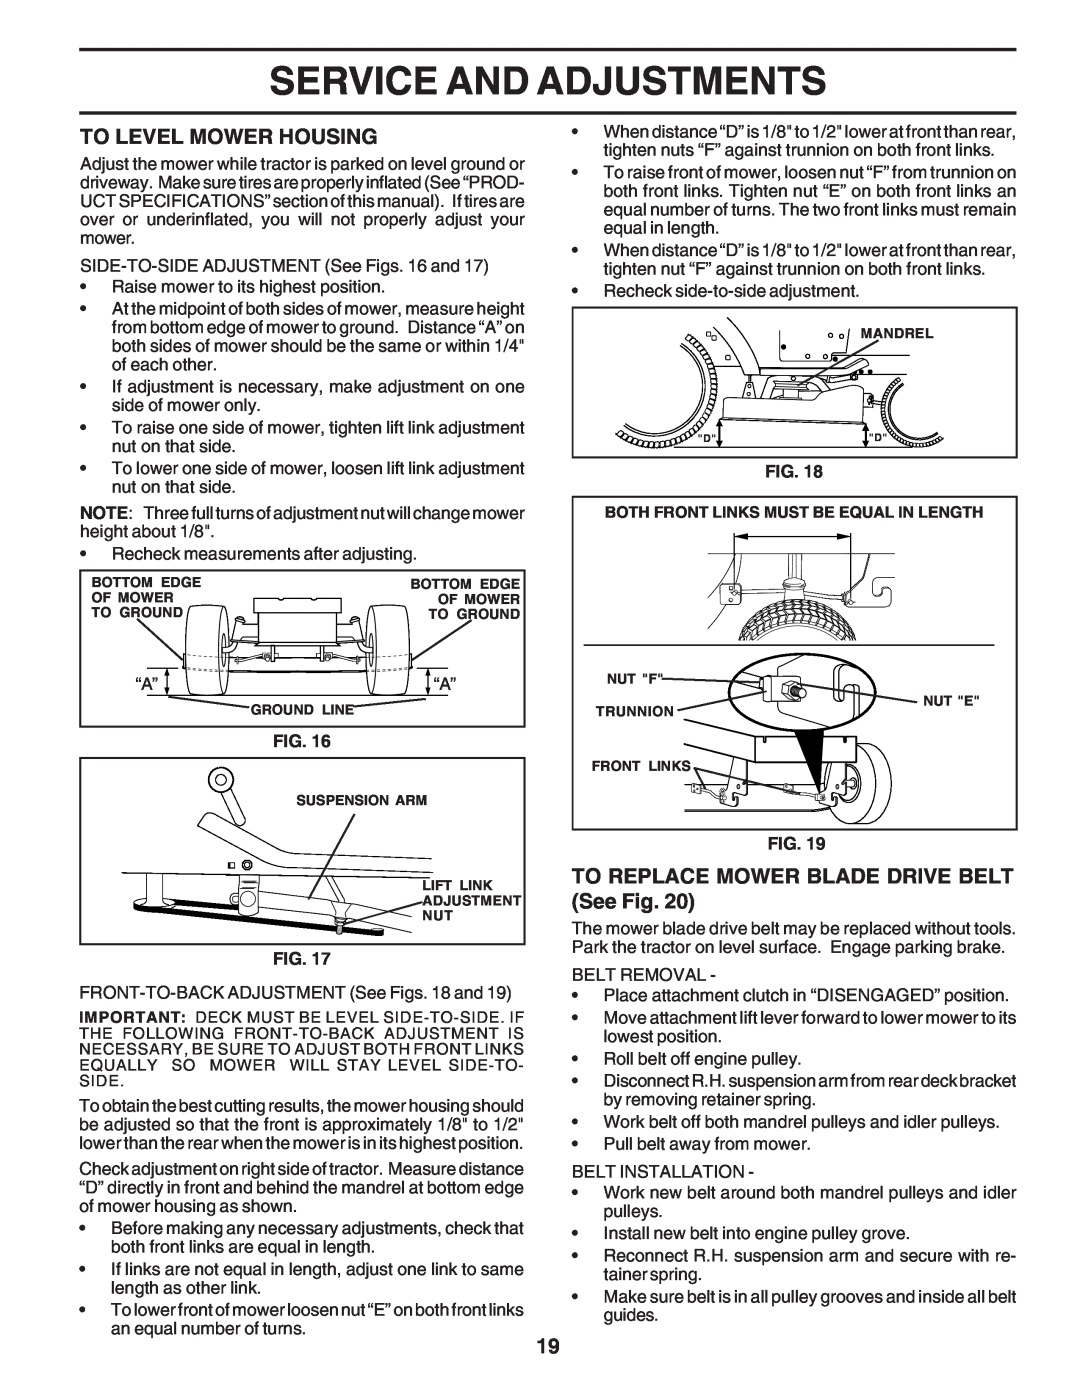 Poulan PC1538B manual To Level Mower Housing, TO REPLACE MOWER BLADE DRIVE BELT See Fig, Service And Adjustments 